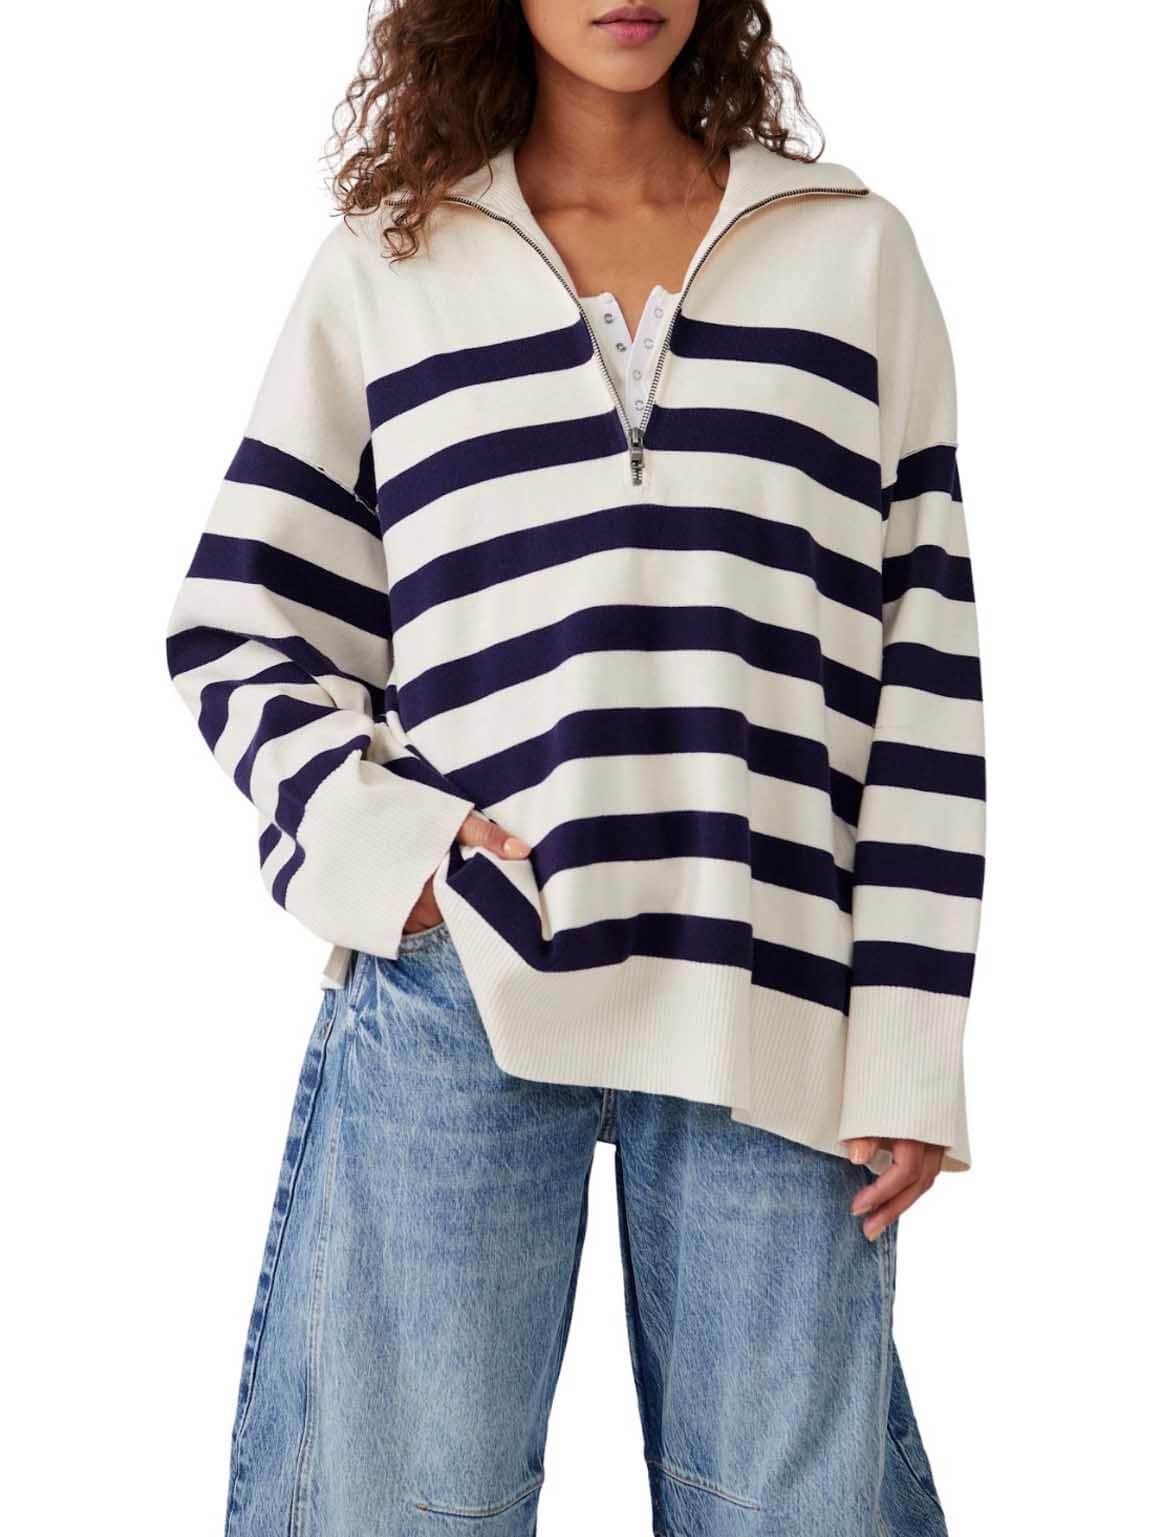 Free People Coastal Stripe Pullover in Champagne Navy Combo